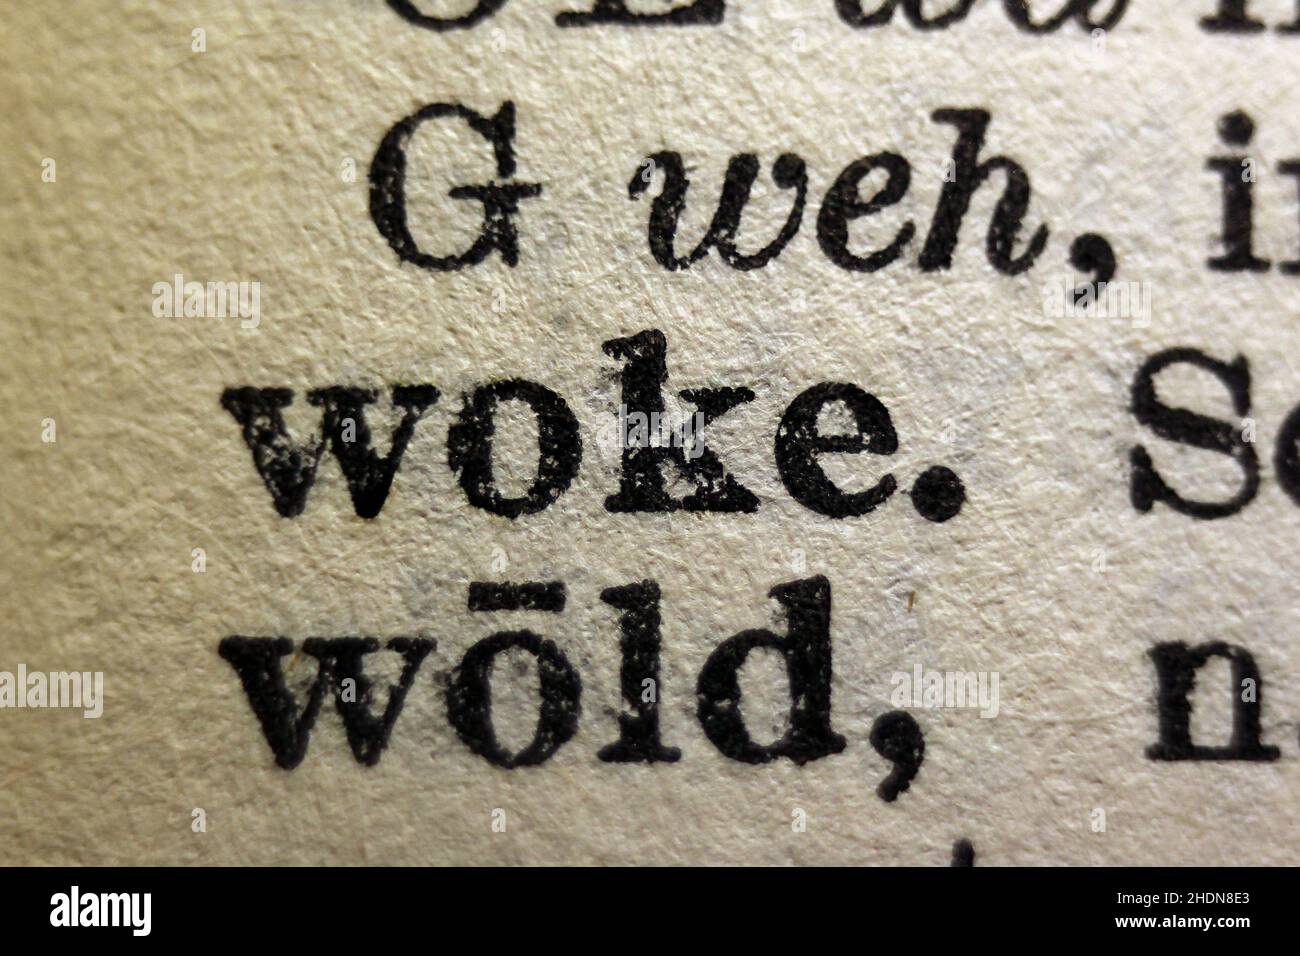 Definition of word woke on dictionary page, close-up Stock Photo